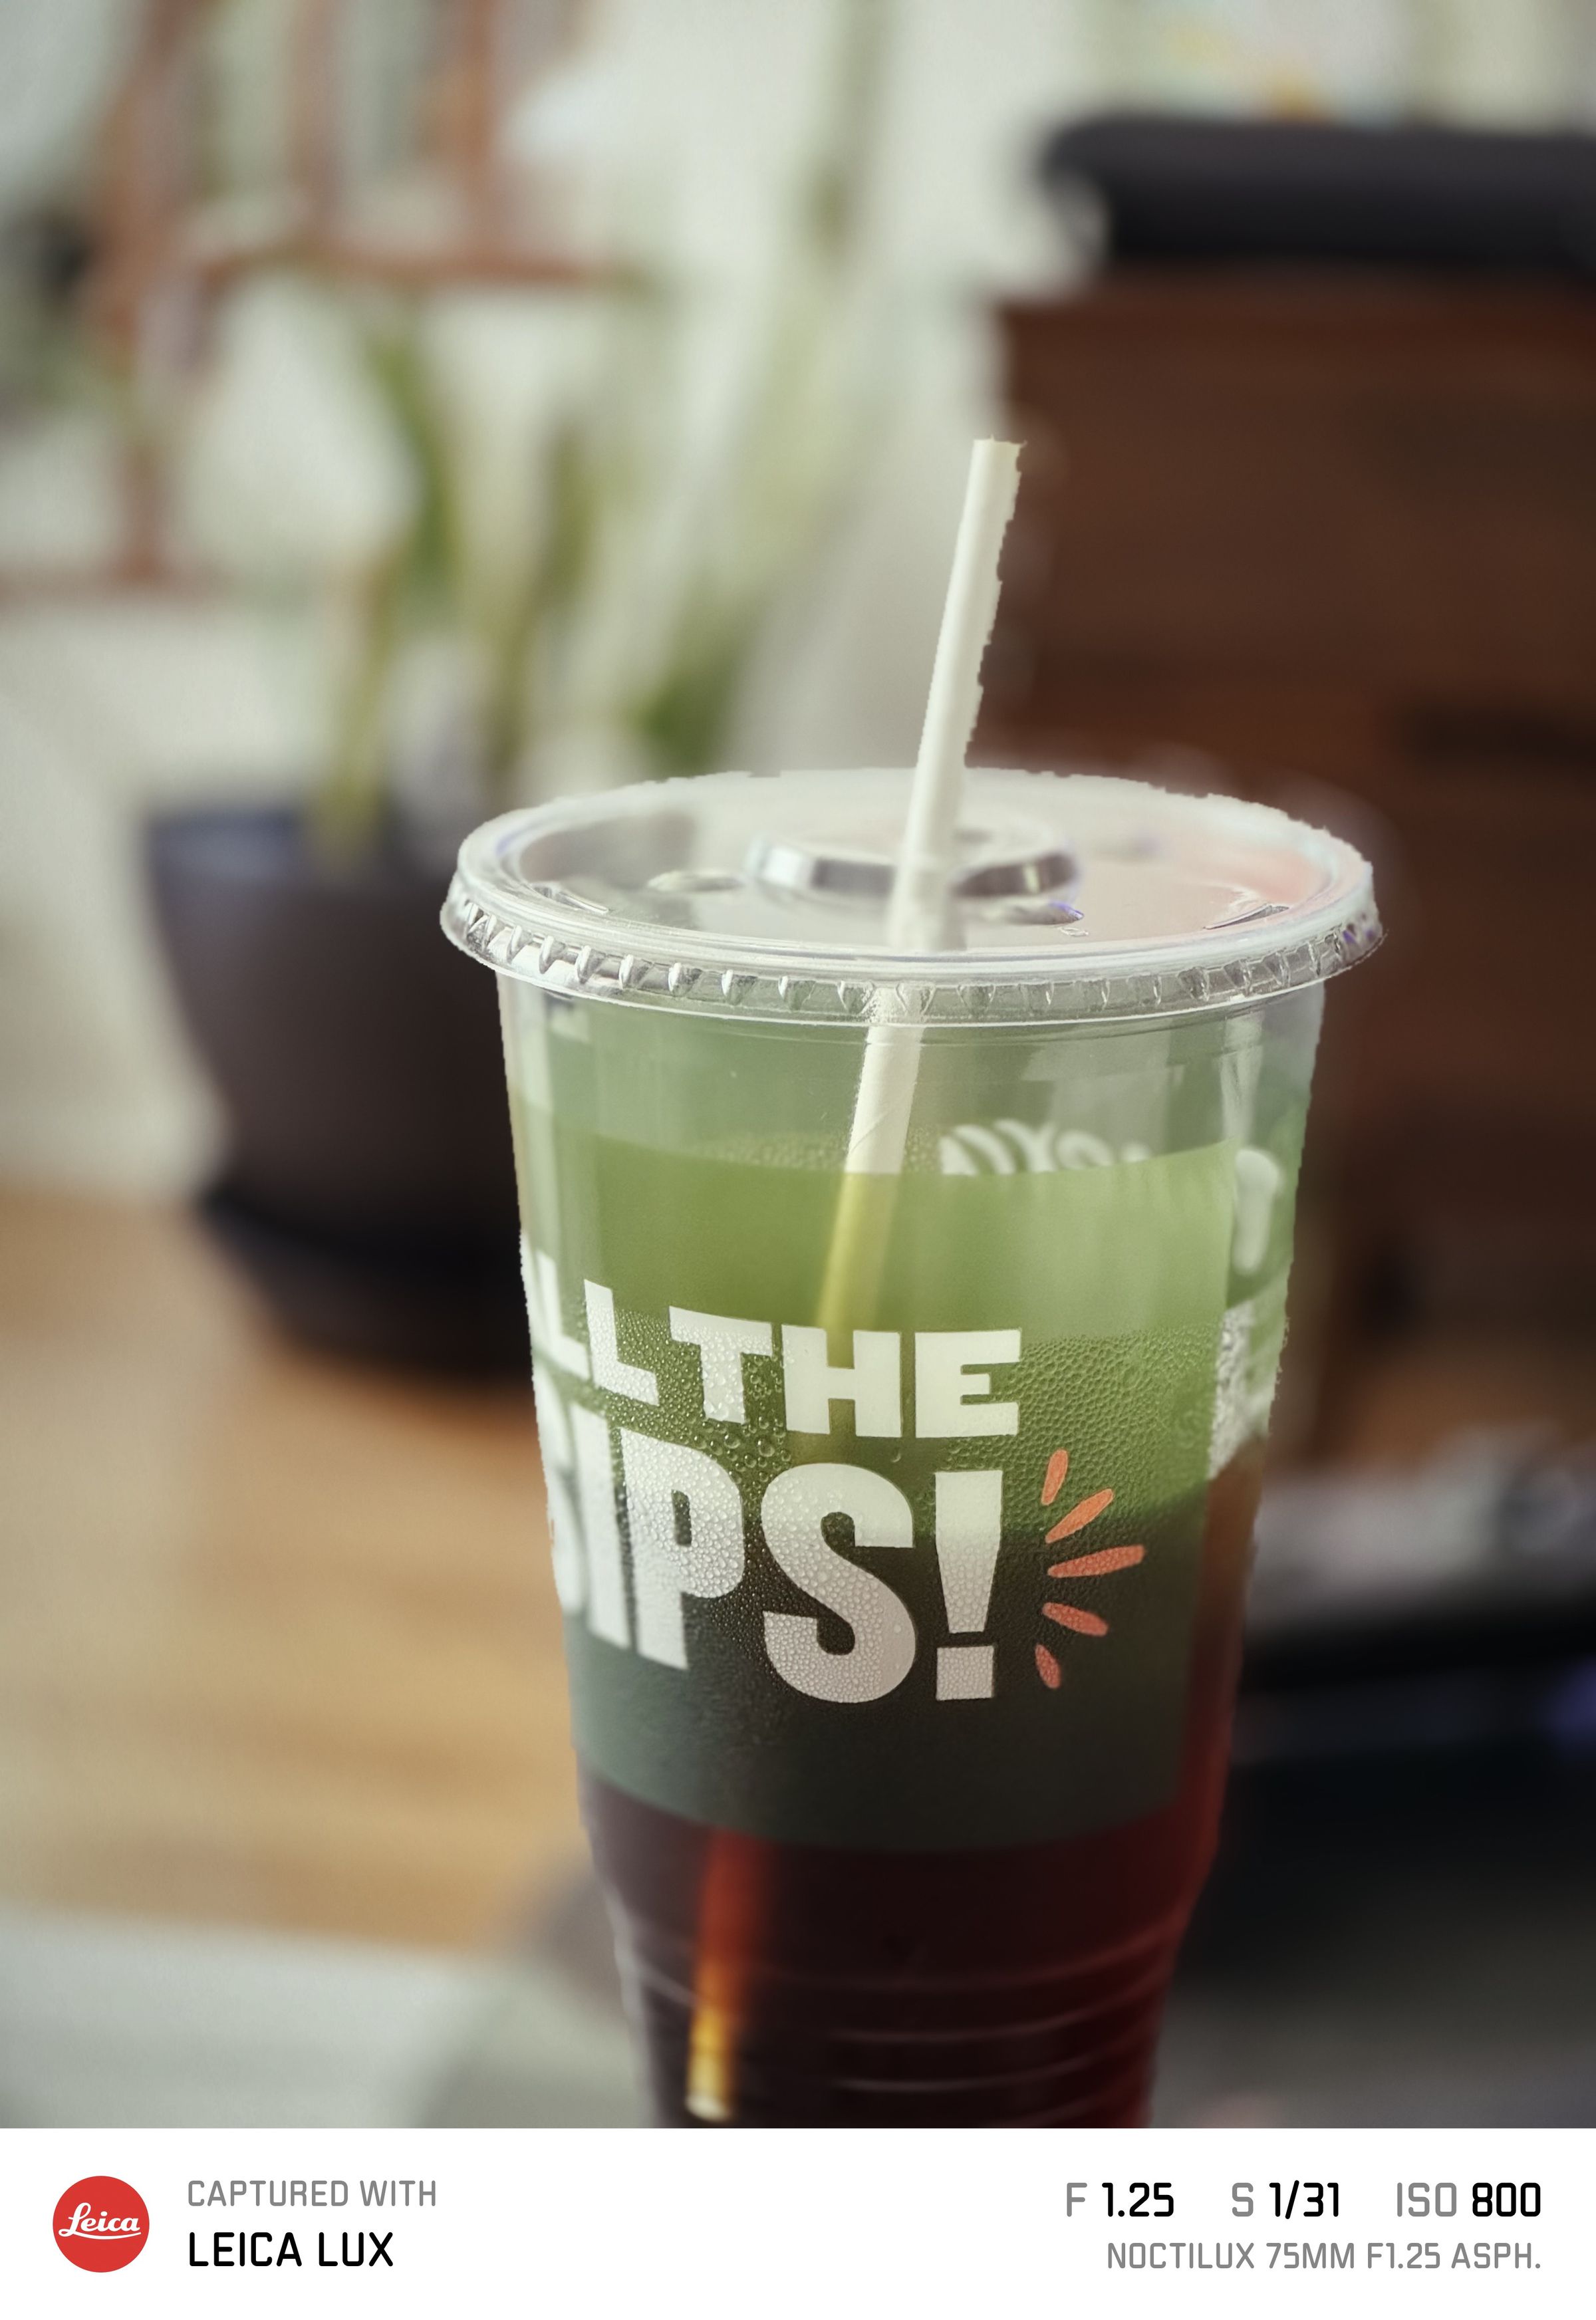 A portrait mode photo taken of an iced coffee cup with a straw. The photo also has a branded Leica Lux frame showing its metadata.